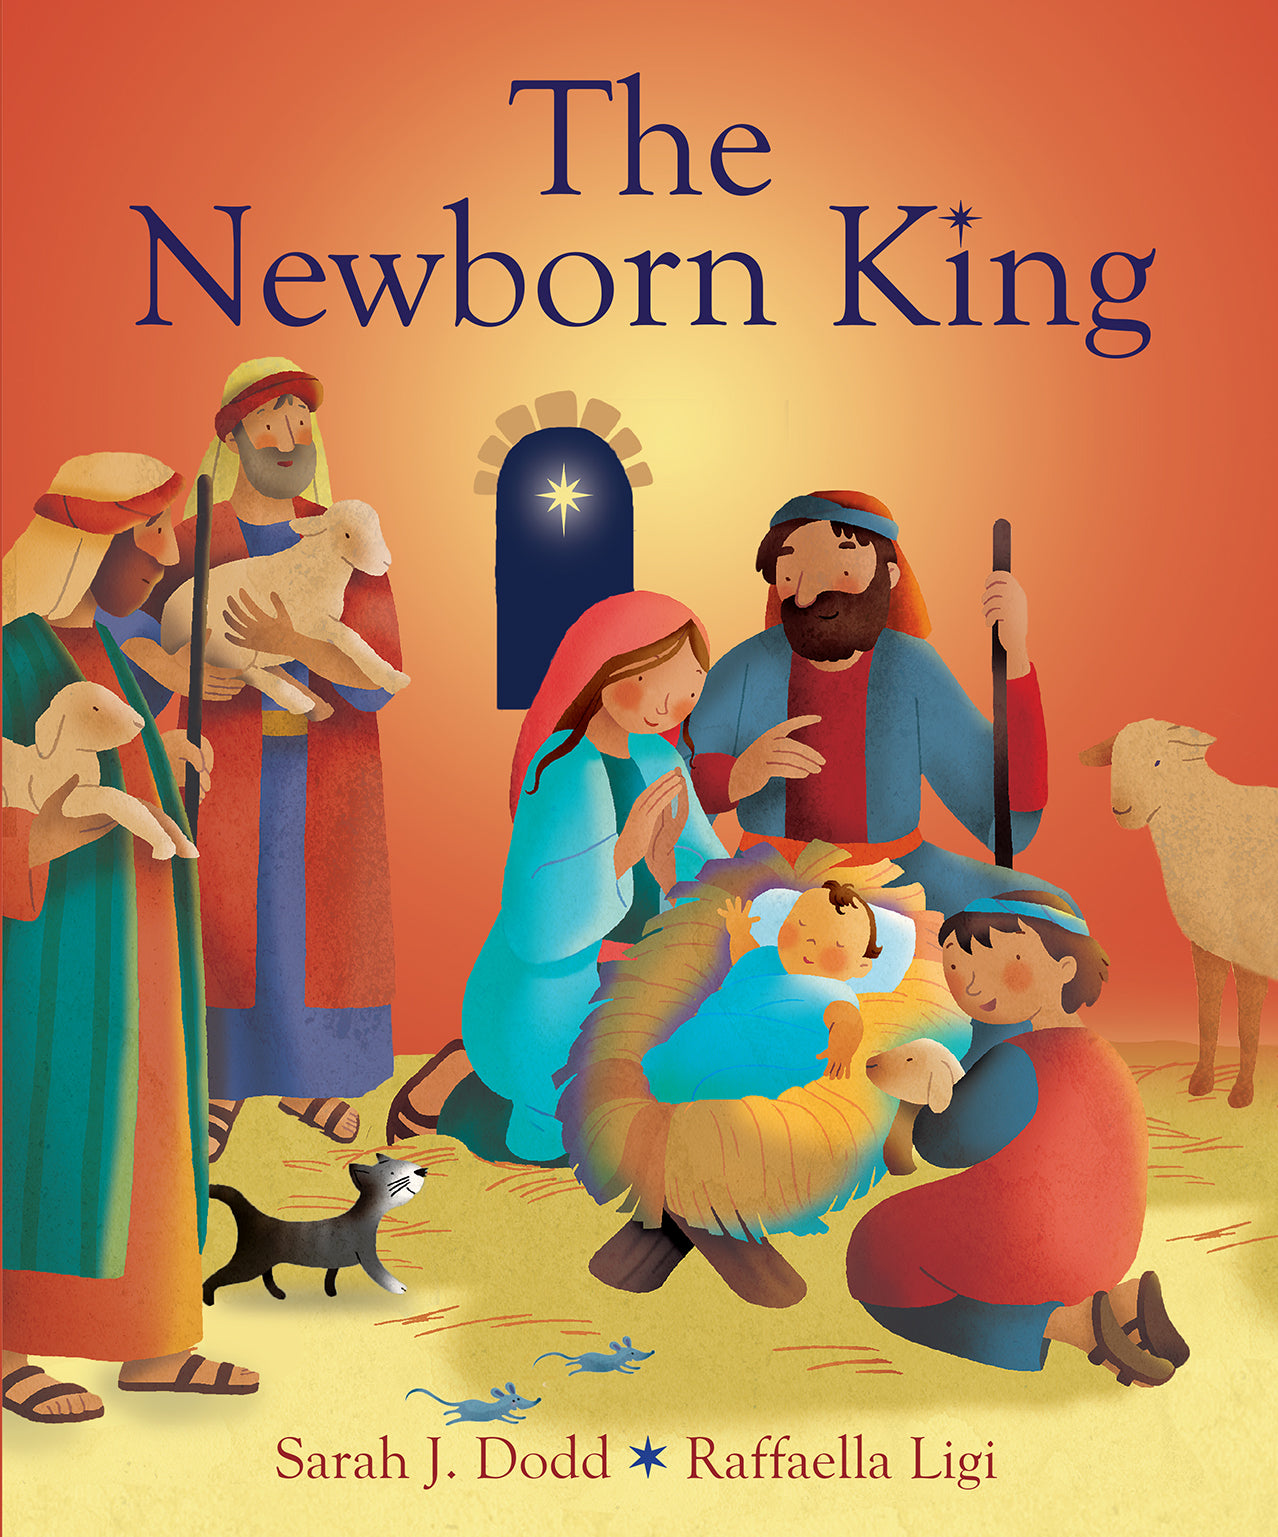 Image of The Newborn King other